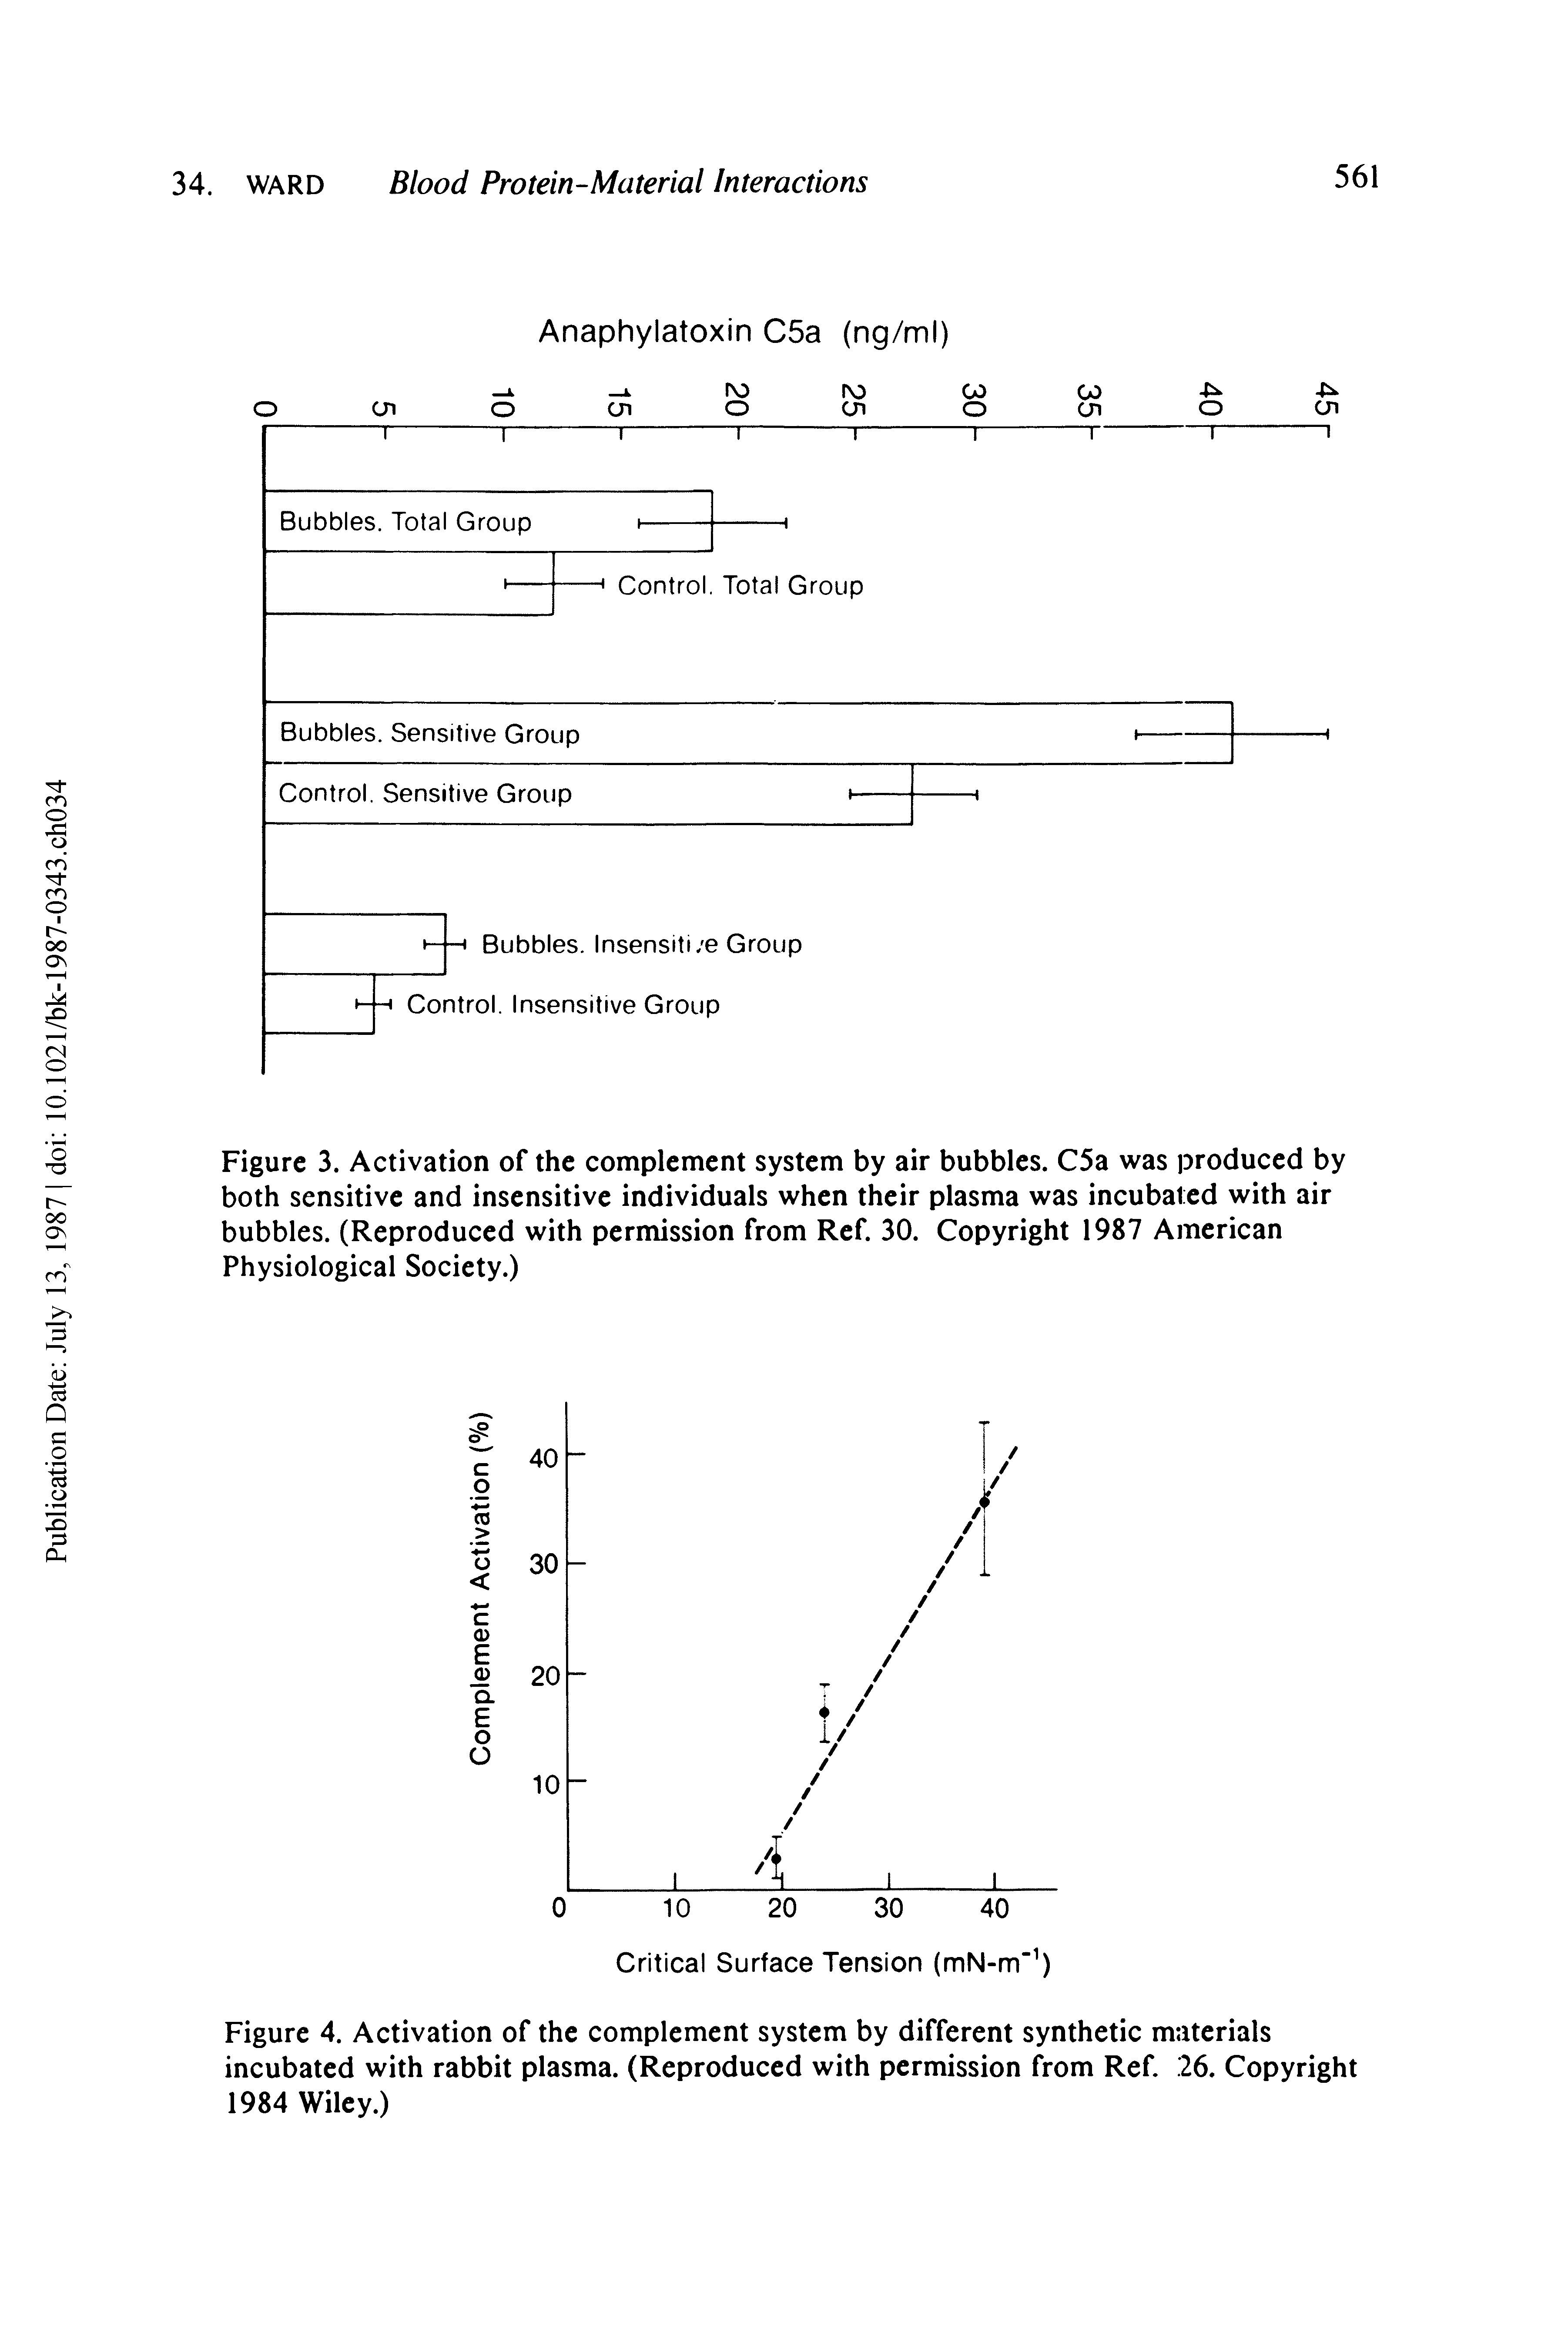 Figure 4. Activation of the complement system by different synthetic materials incubated with rabbit plasma. (Reproduced with permission from Ref.. 26. Copyright 1984 Wiley.)...